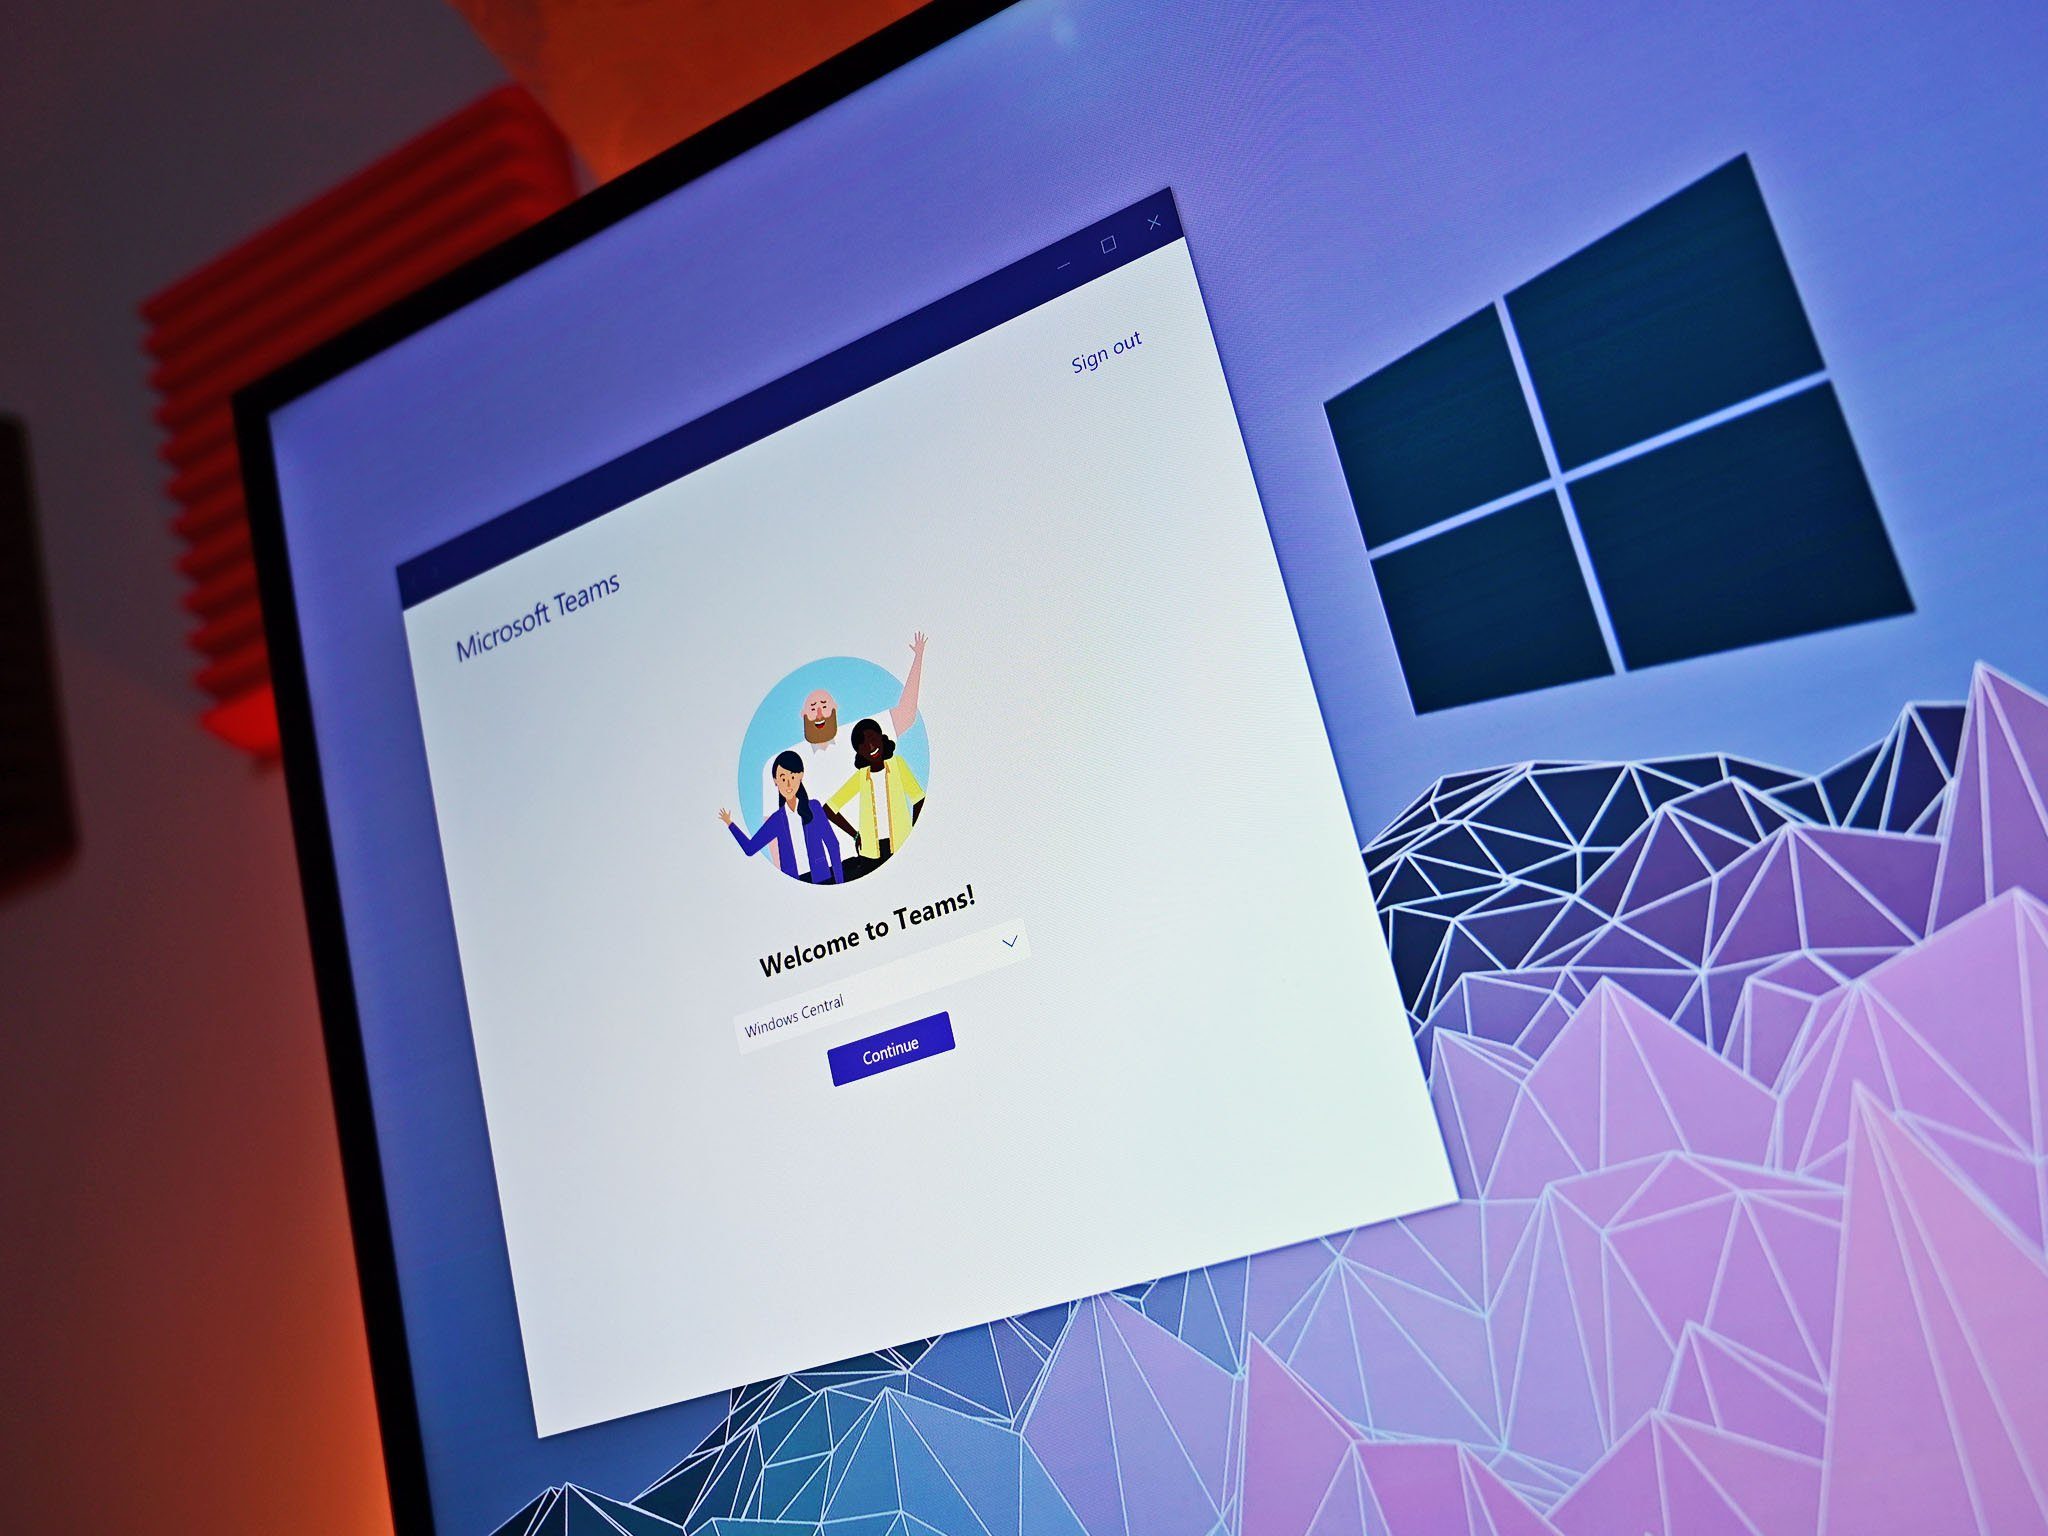 Microsoft Teams for Windows 11 is now considerably faster